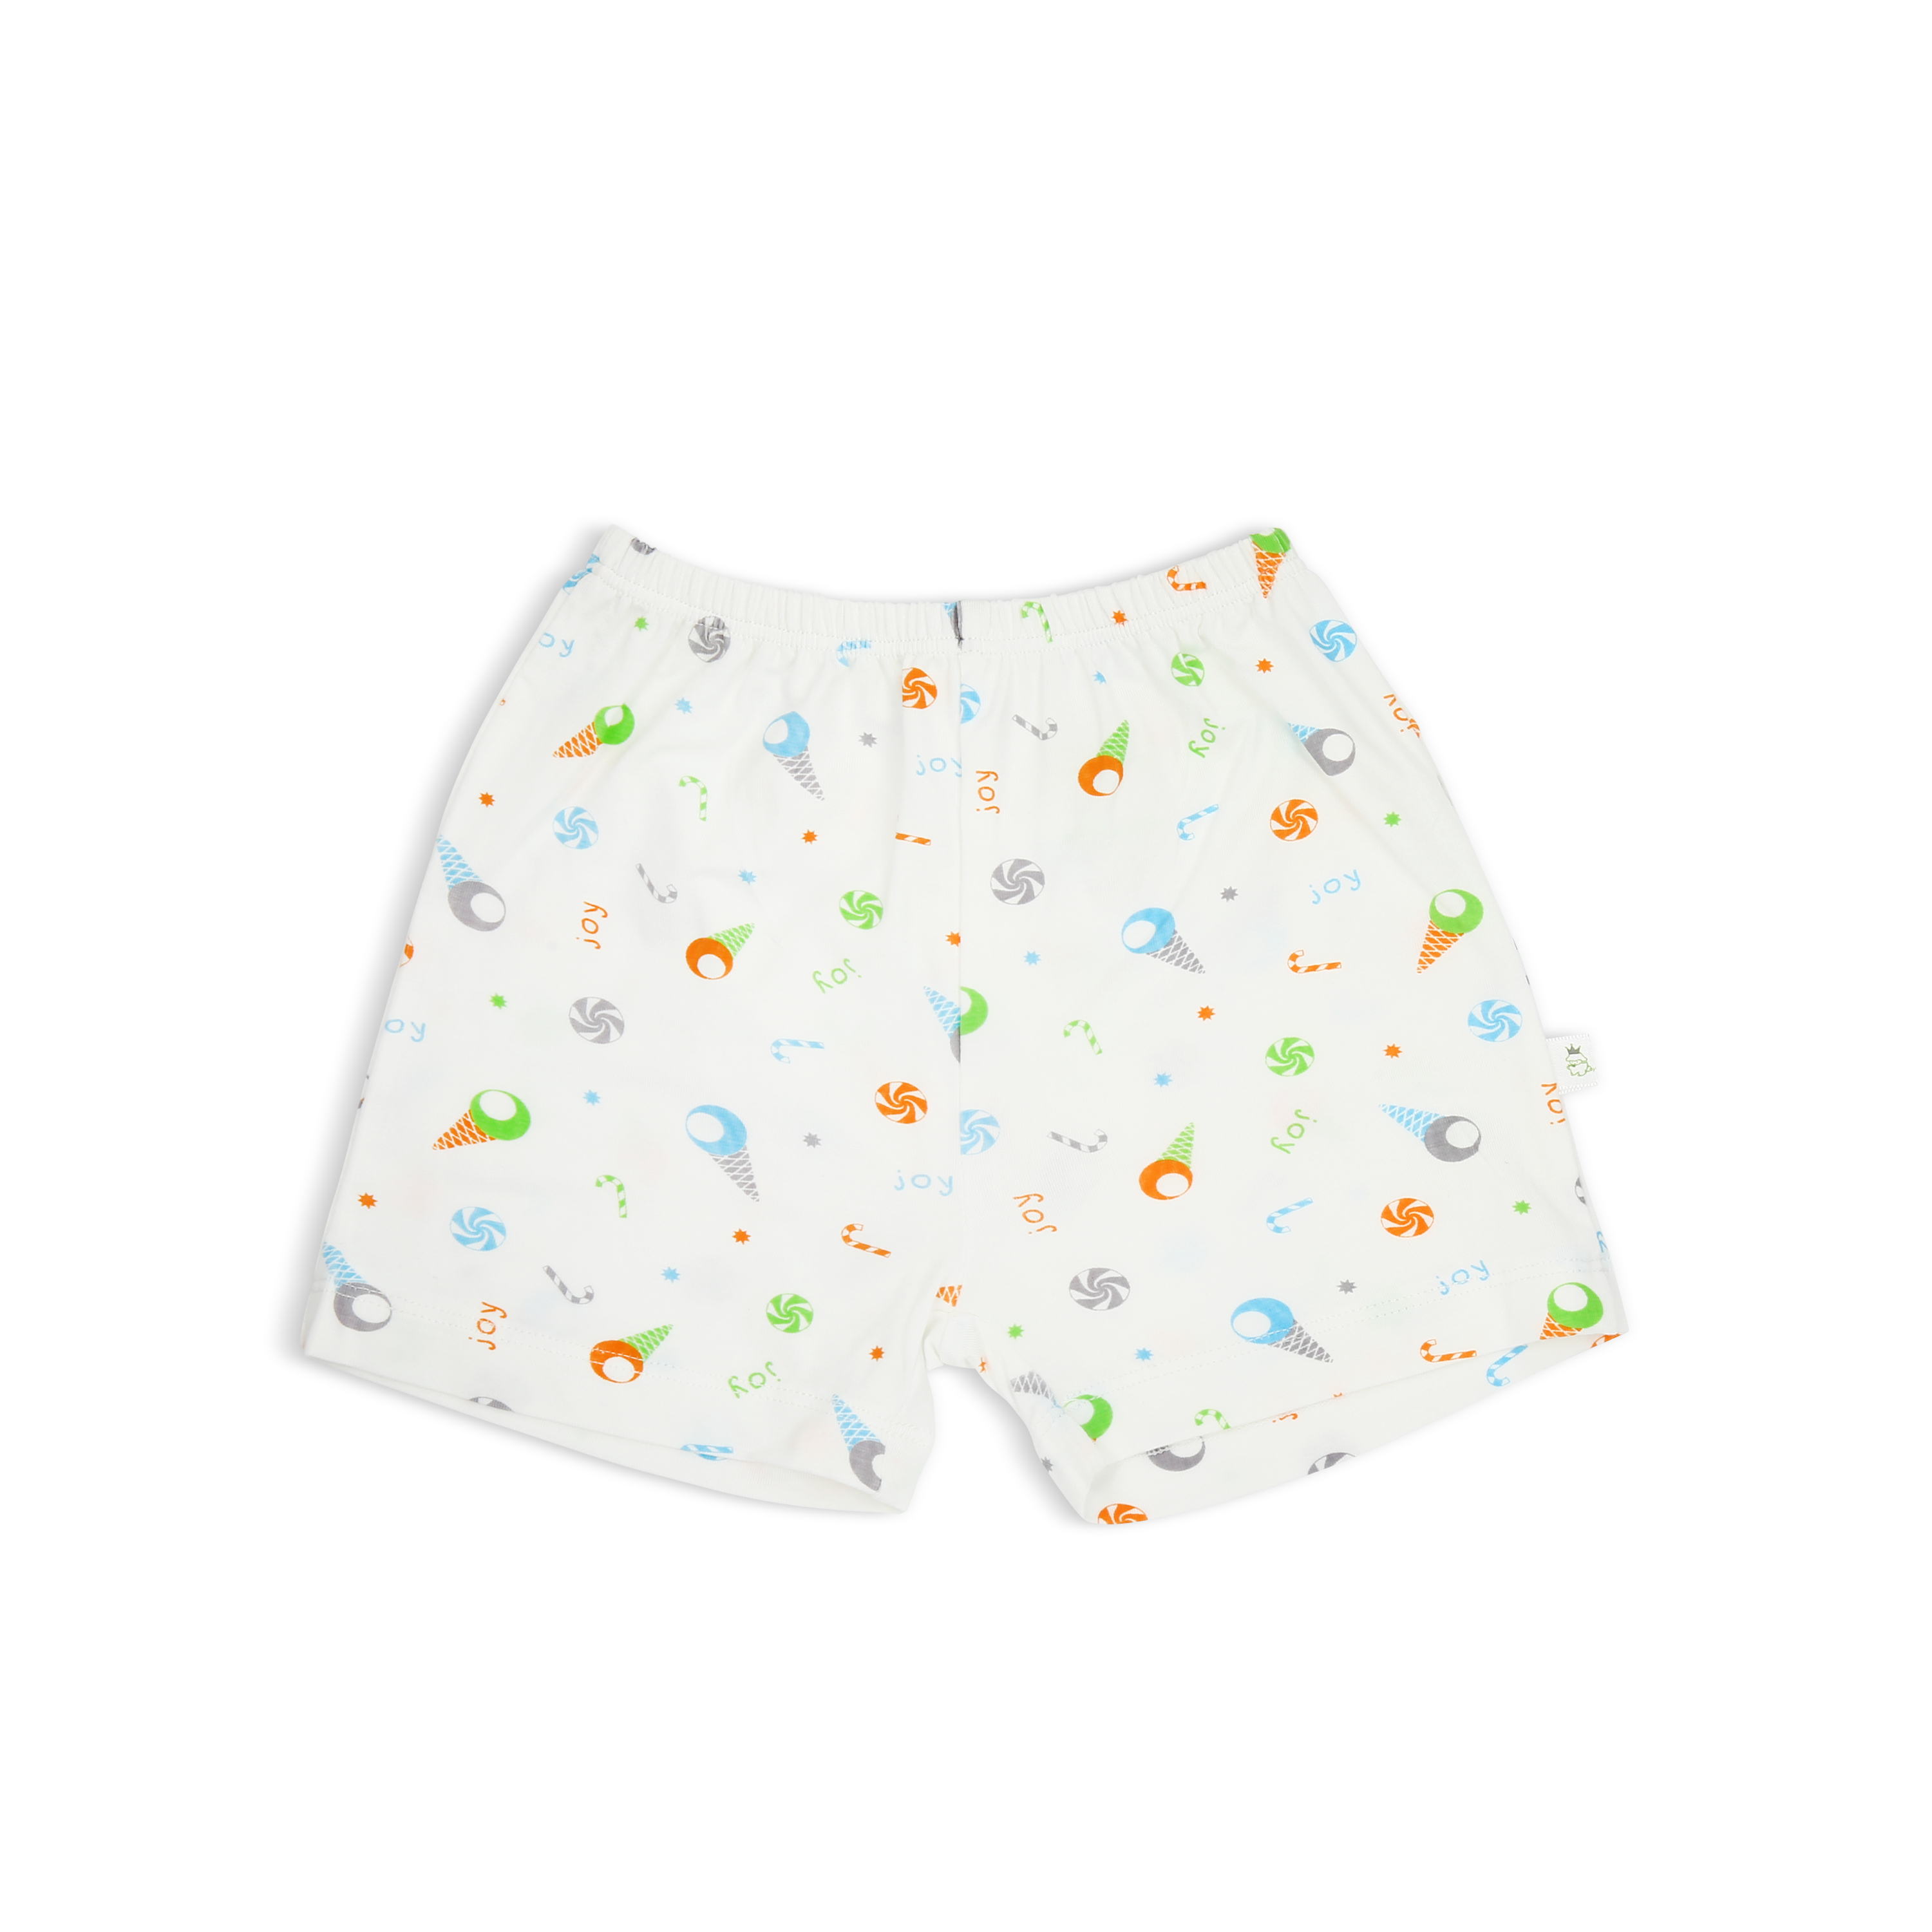 Simply Life Bamboo Shorts Ice Cream (0-3 months and 3-6 months)